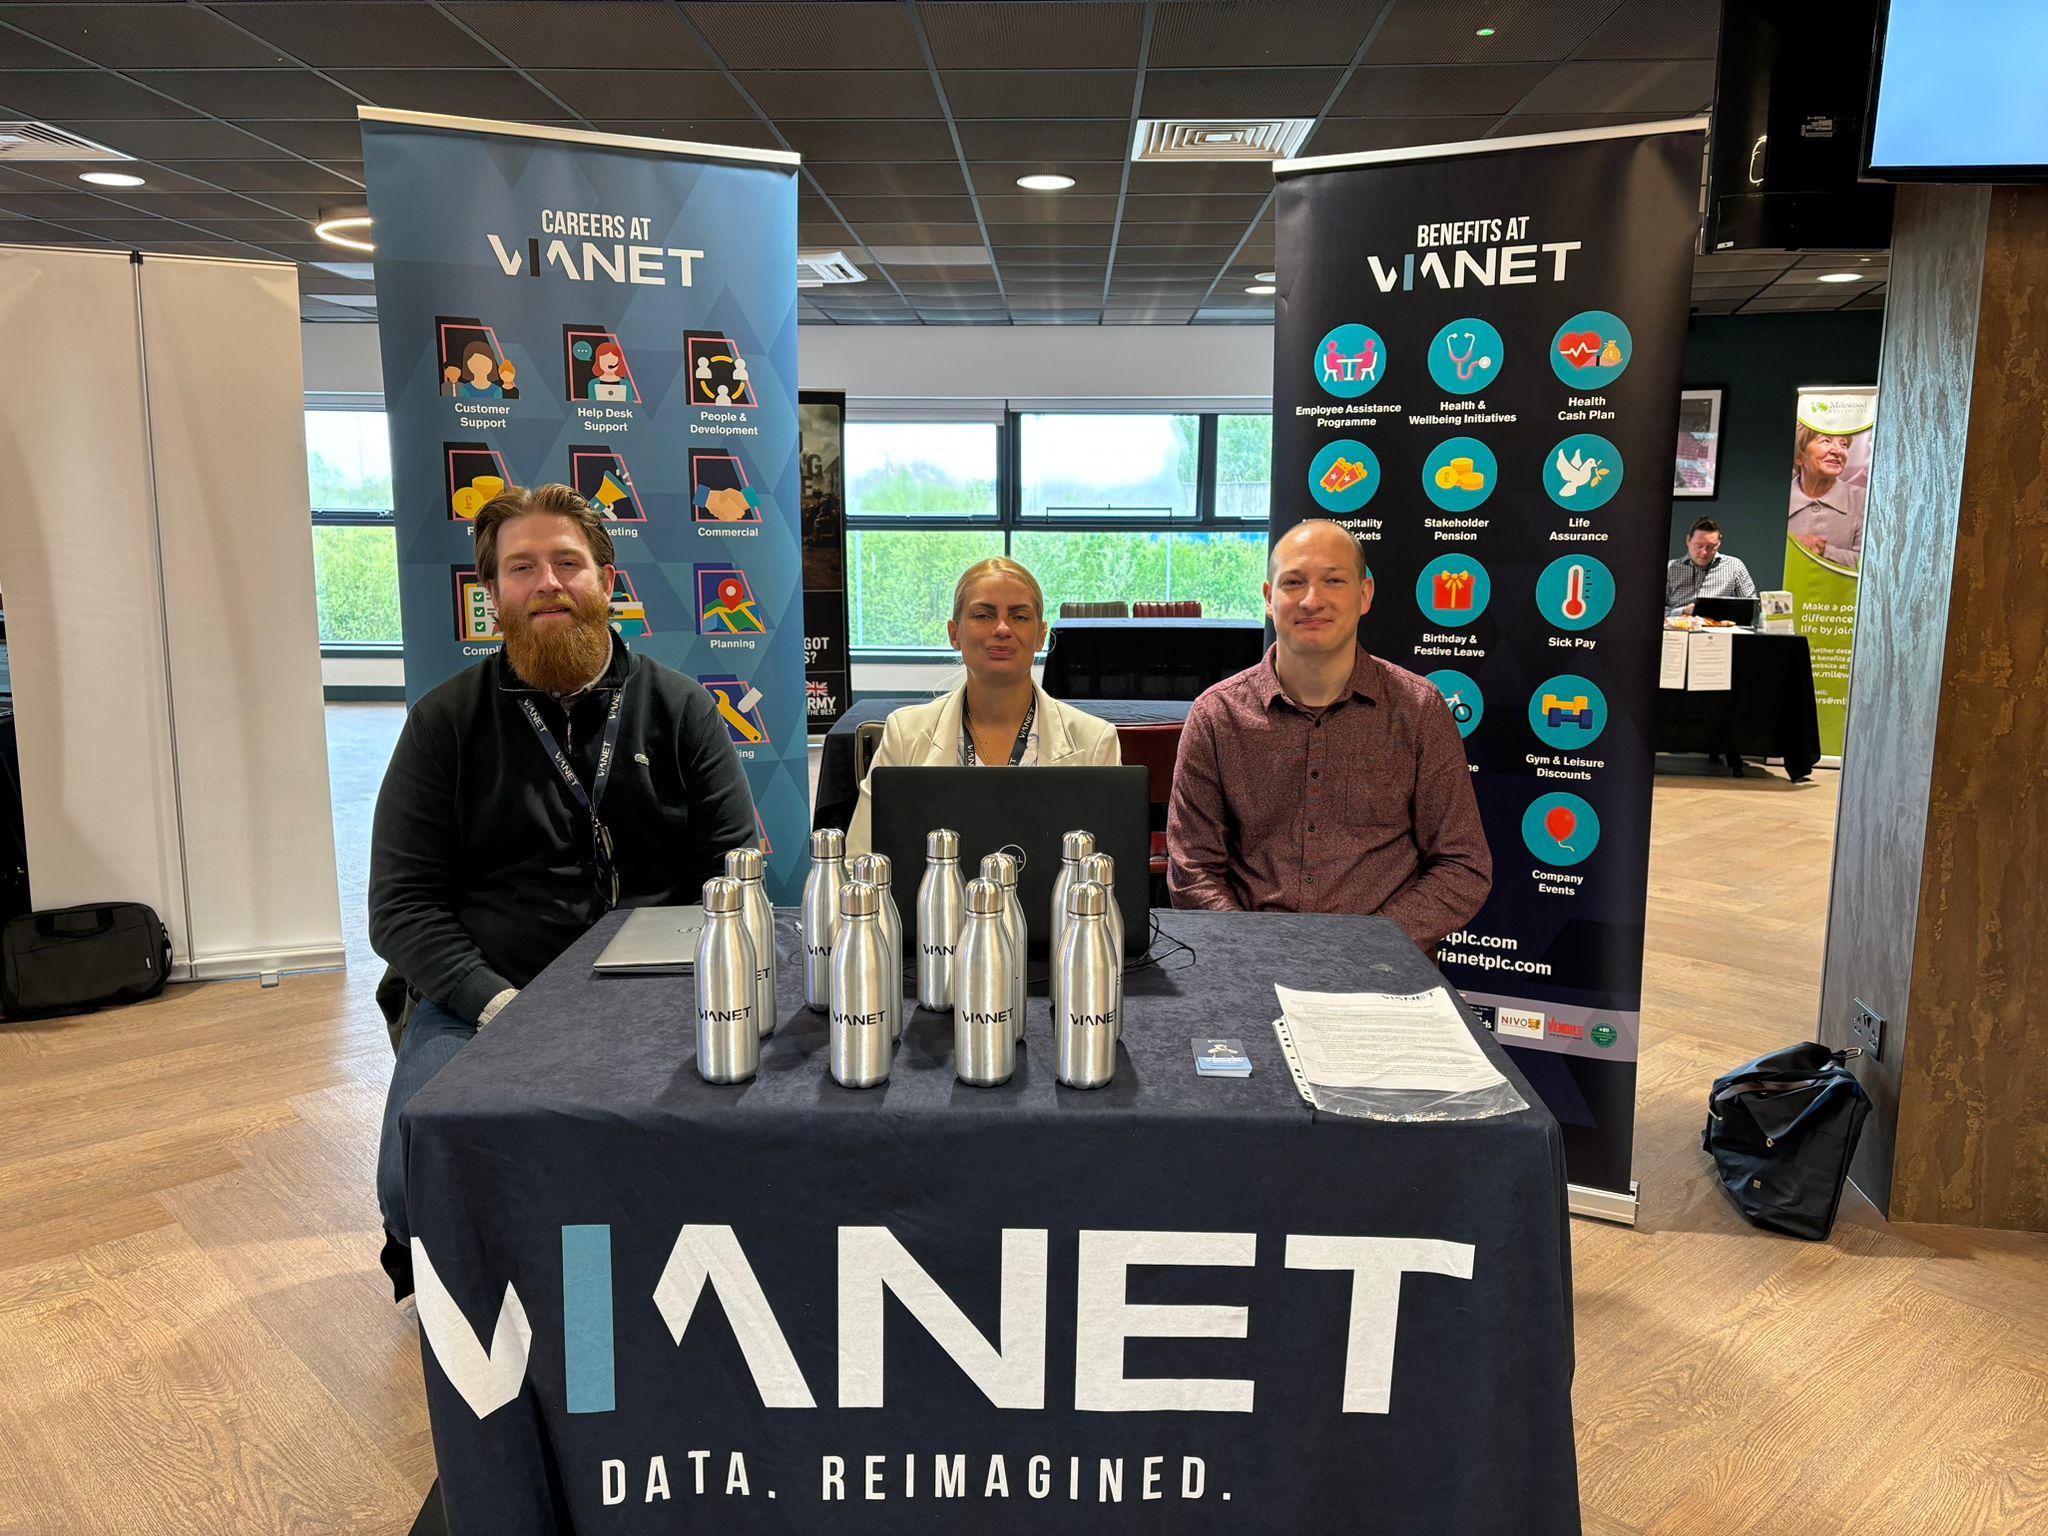 Vianet PLC at our event in Middlesbrough